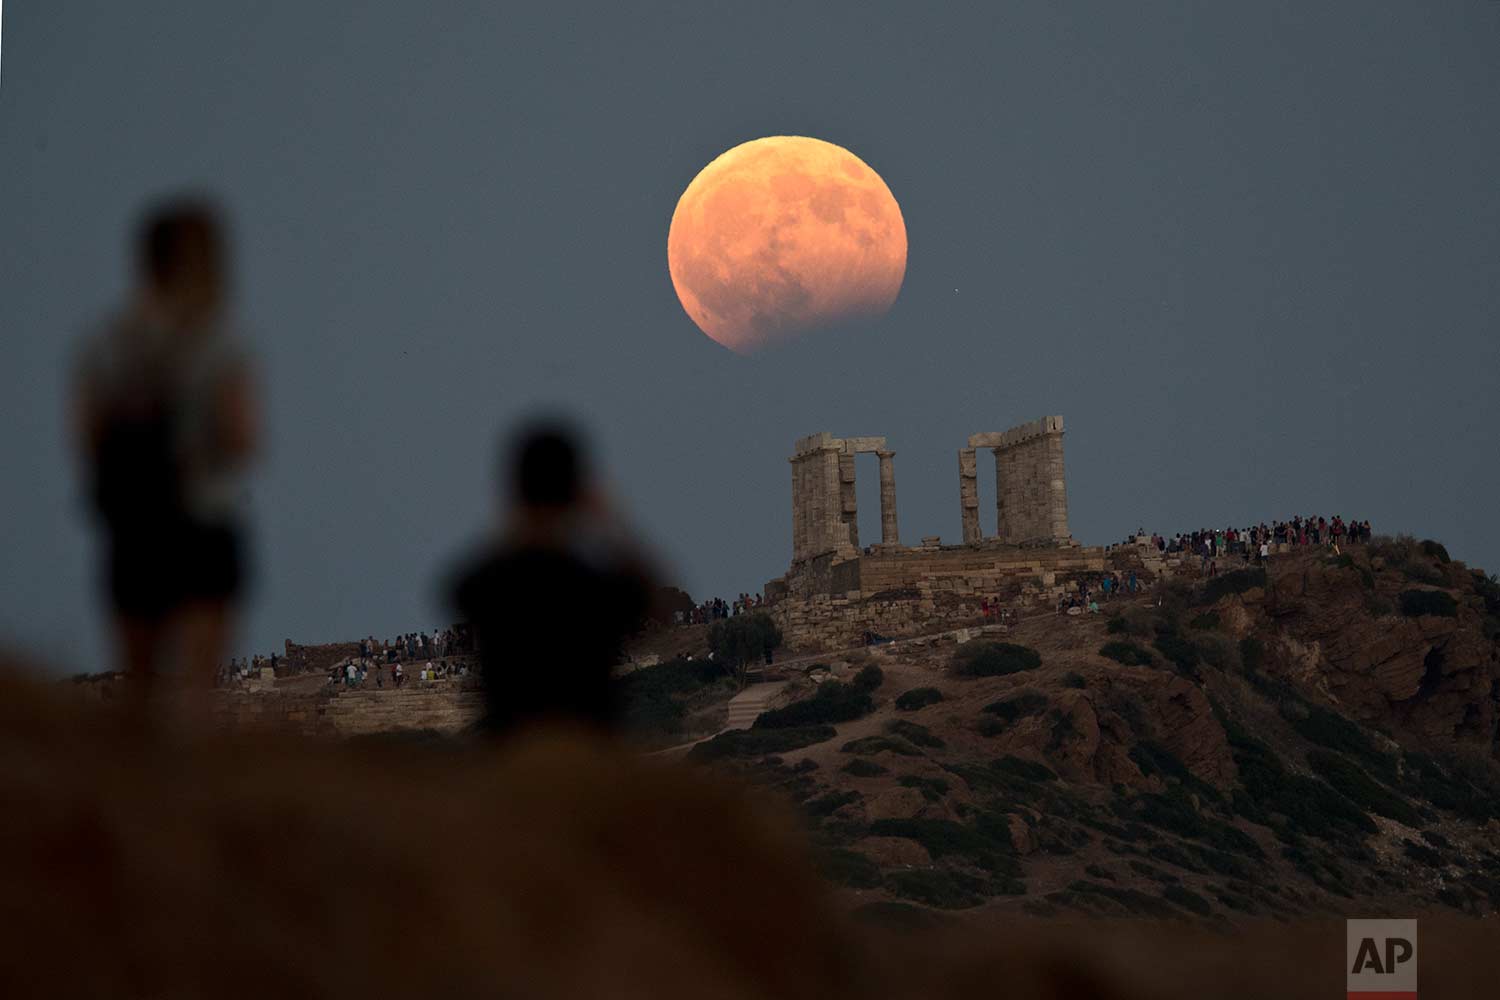  In this Monday, Aug. 7, 2017 photo, the August full moon rises above the 5th Century BC Temple of Poseidon at Cape Sounio, south of Athens. More than a hundred of Greece’s ancient sites - but not the Acropolis in Athens - and museums were kept open 